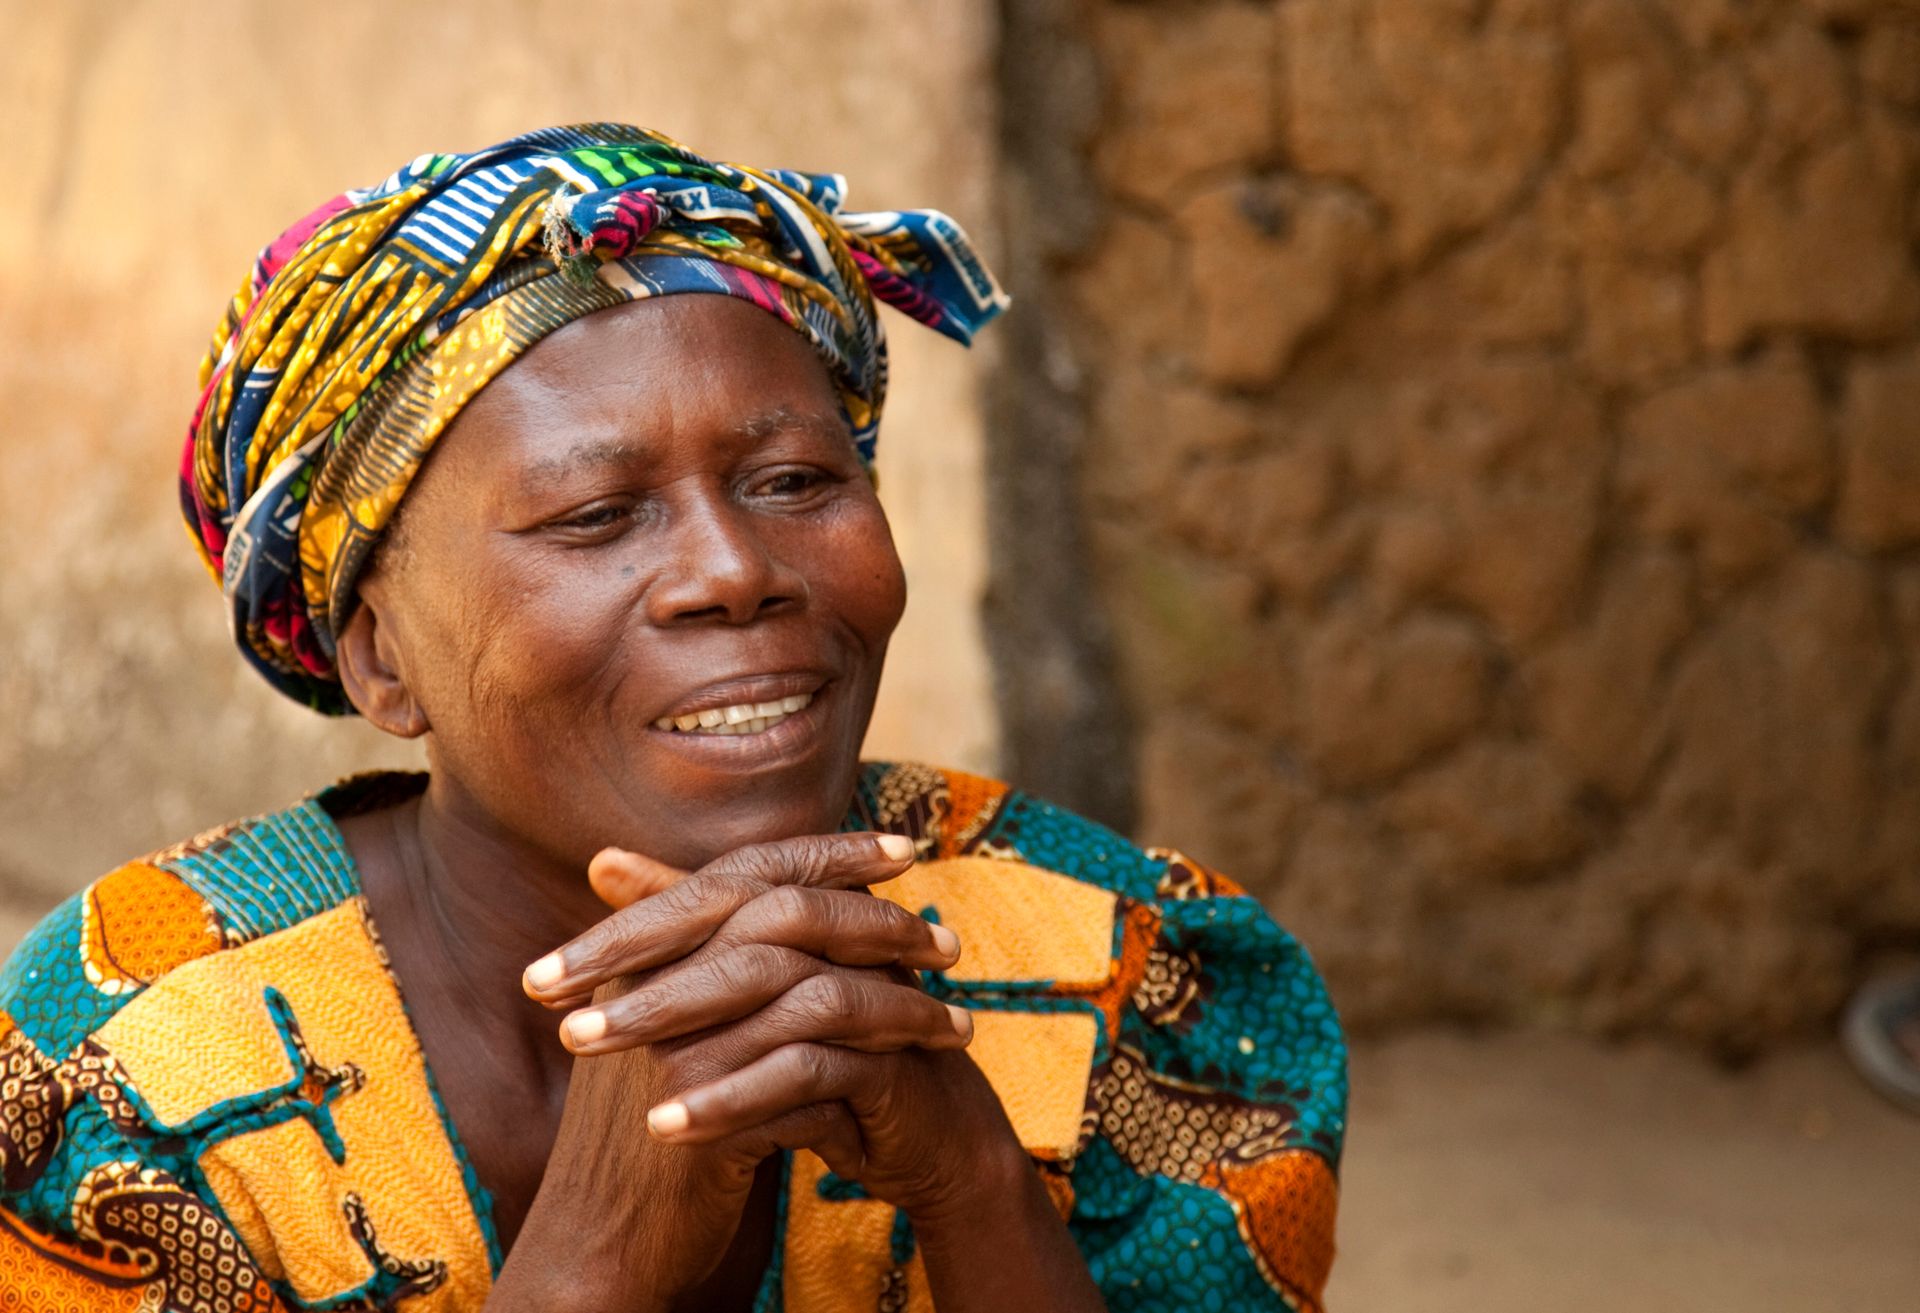 An African woman in a colorful head wrap and shirt clasping her hands together.